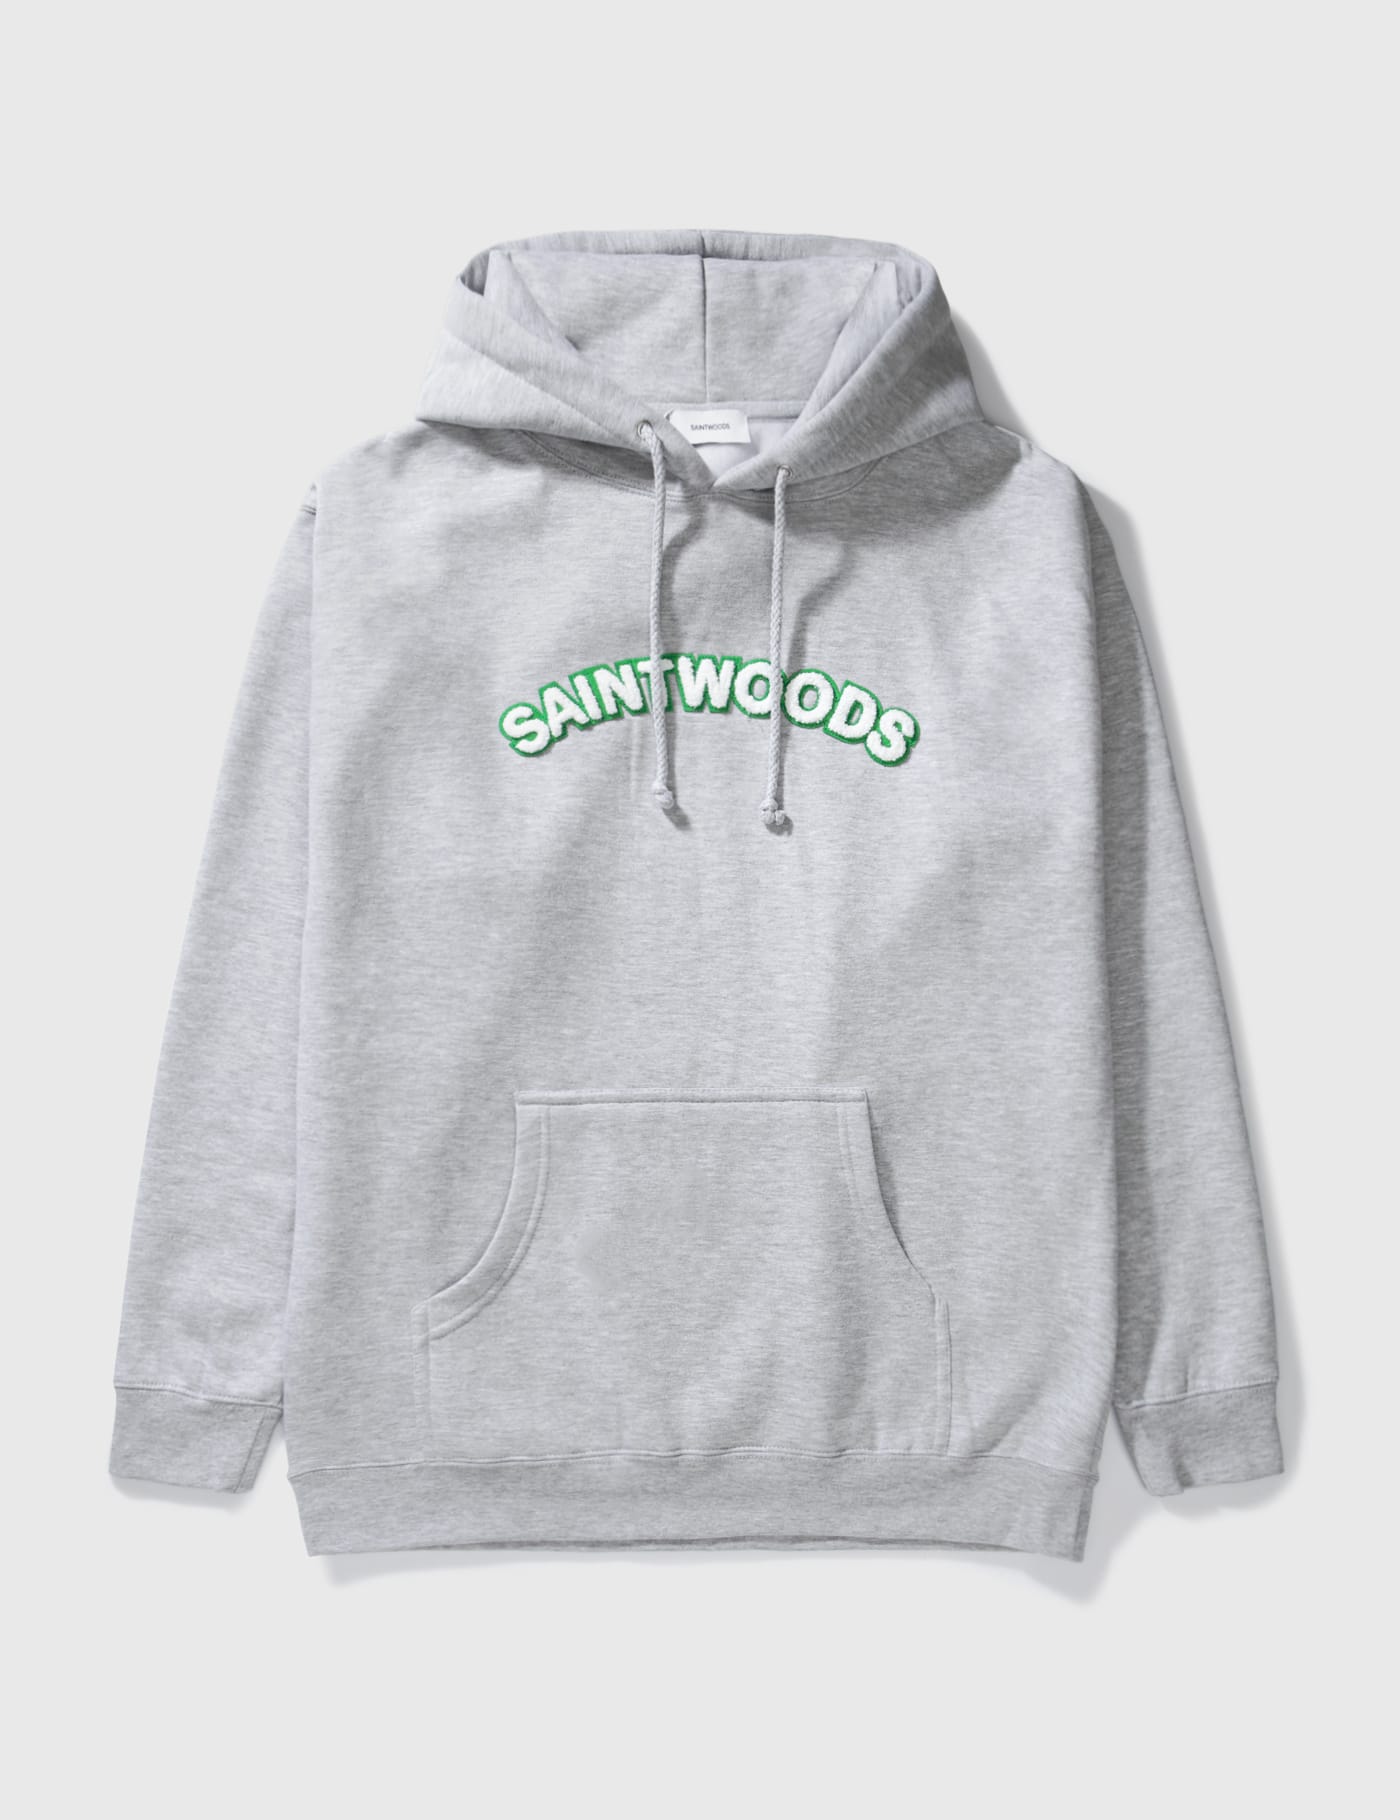 Saintwoods - Chenille Patch Hoodie | HBX - Globally Curated Fashion and  Lifestyle by Hypebeast